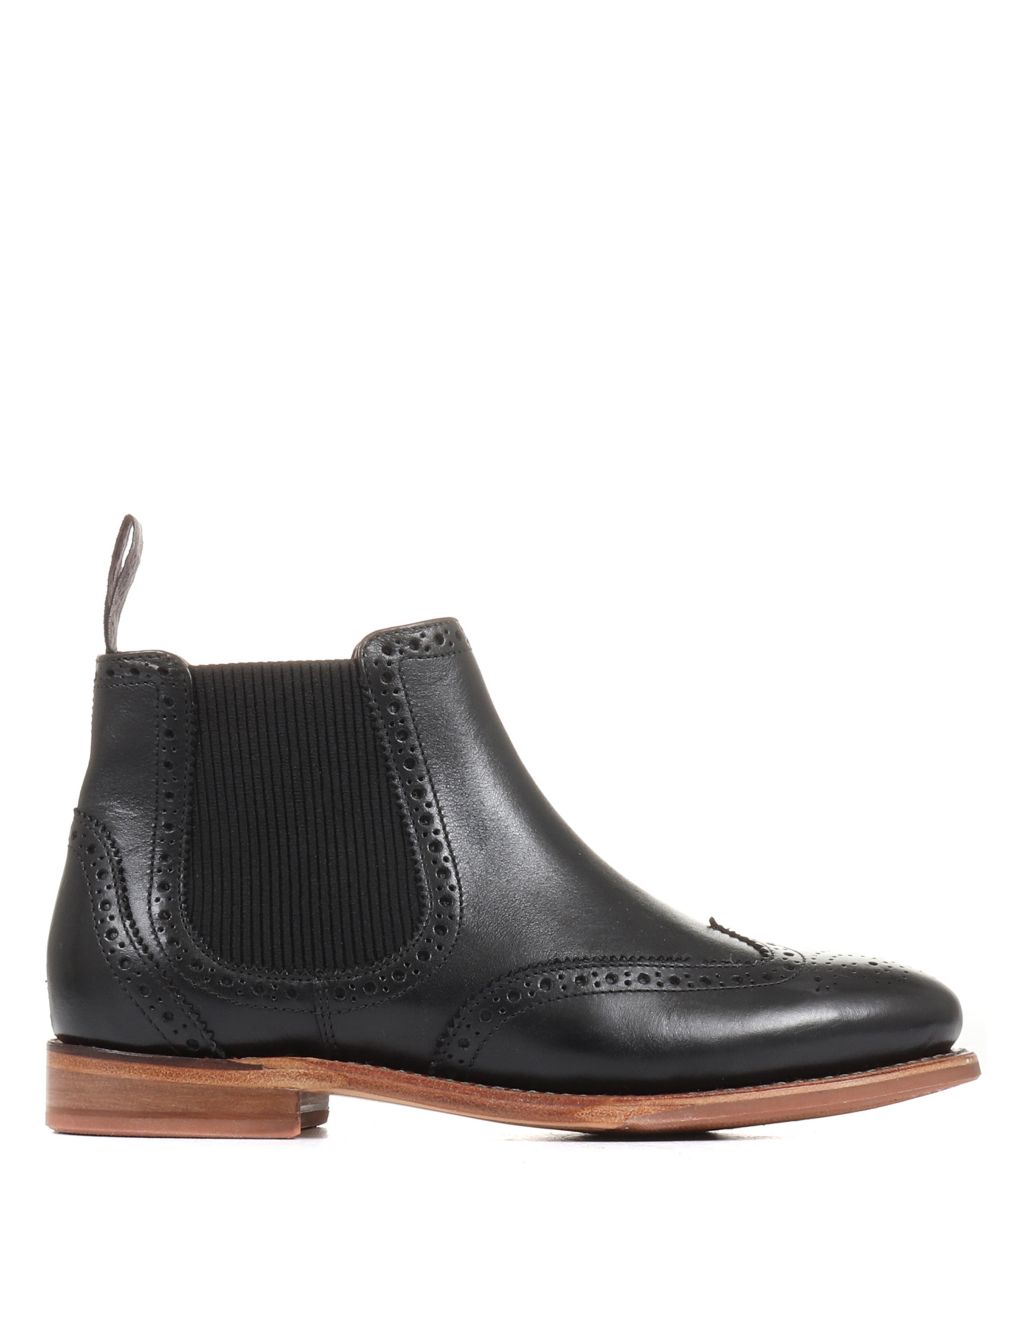 Leather Chelsea Brogue Detail Flat Boots image 3